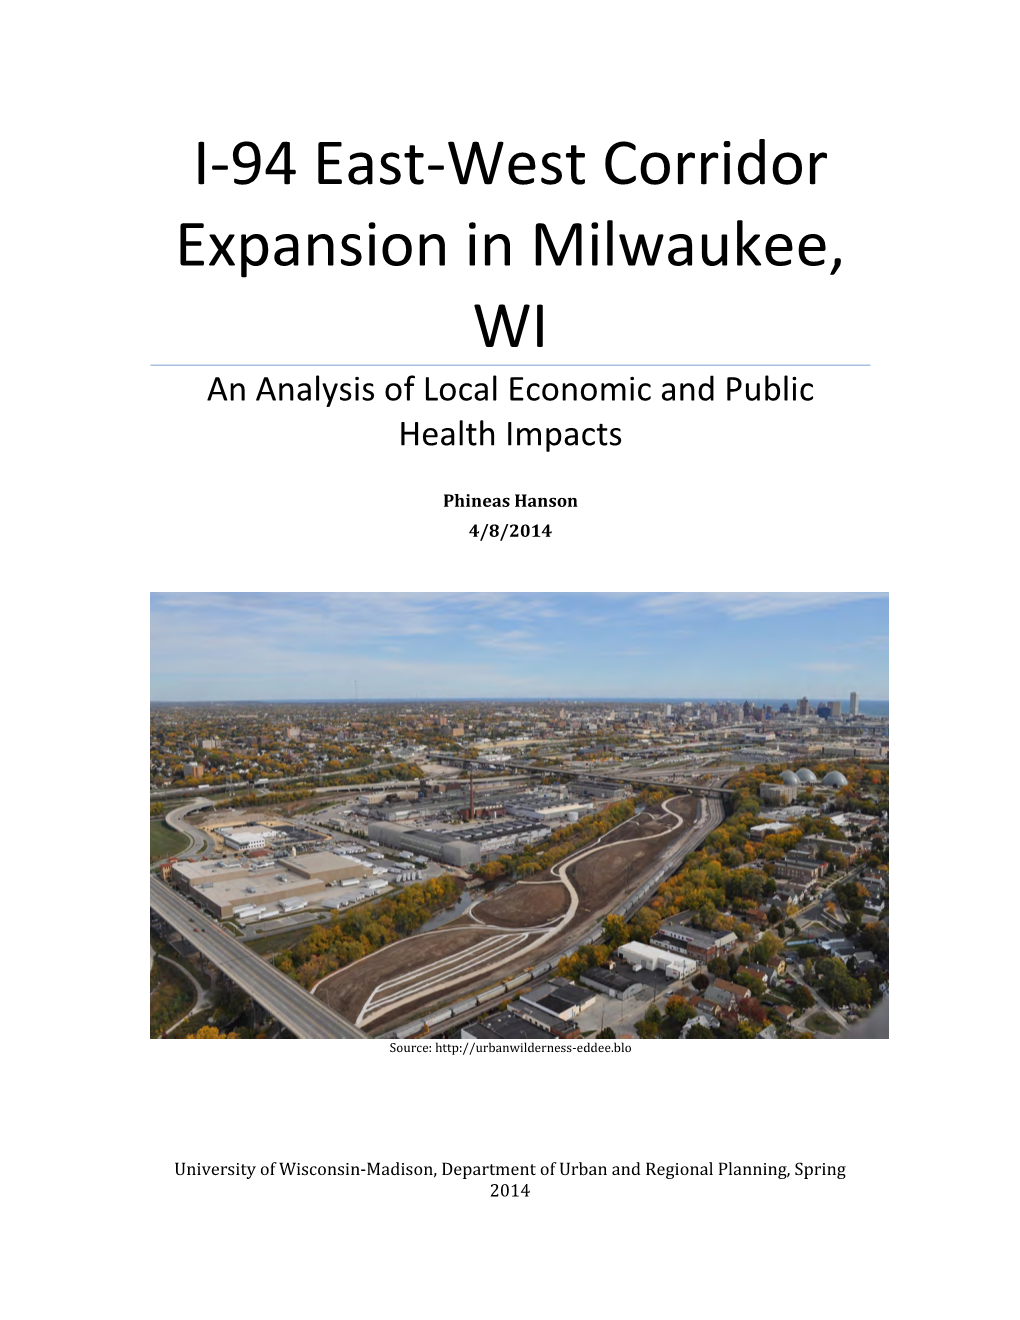 I-94 East-West Corridor Expansion in Milwaukee, WI: an Analysis of Local